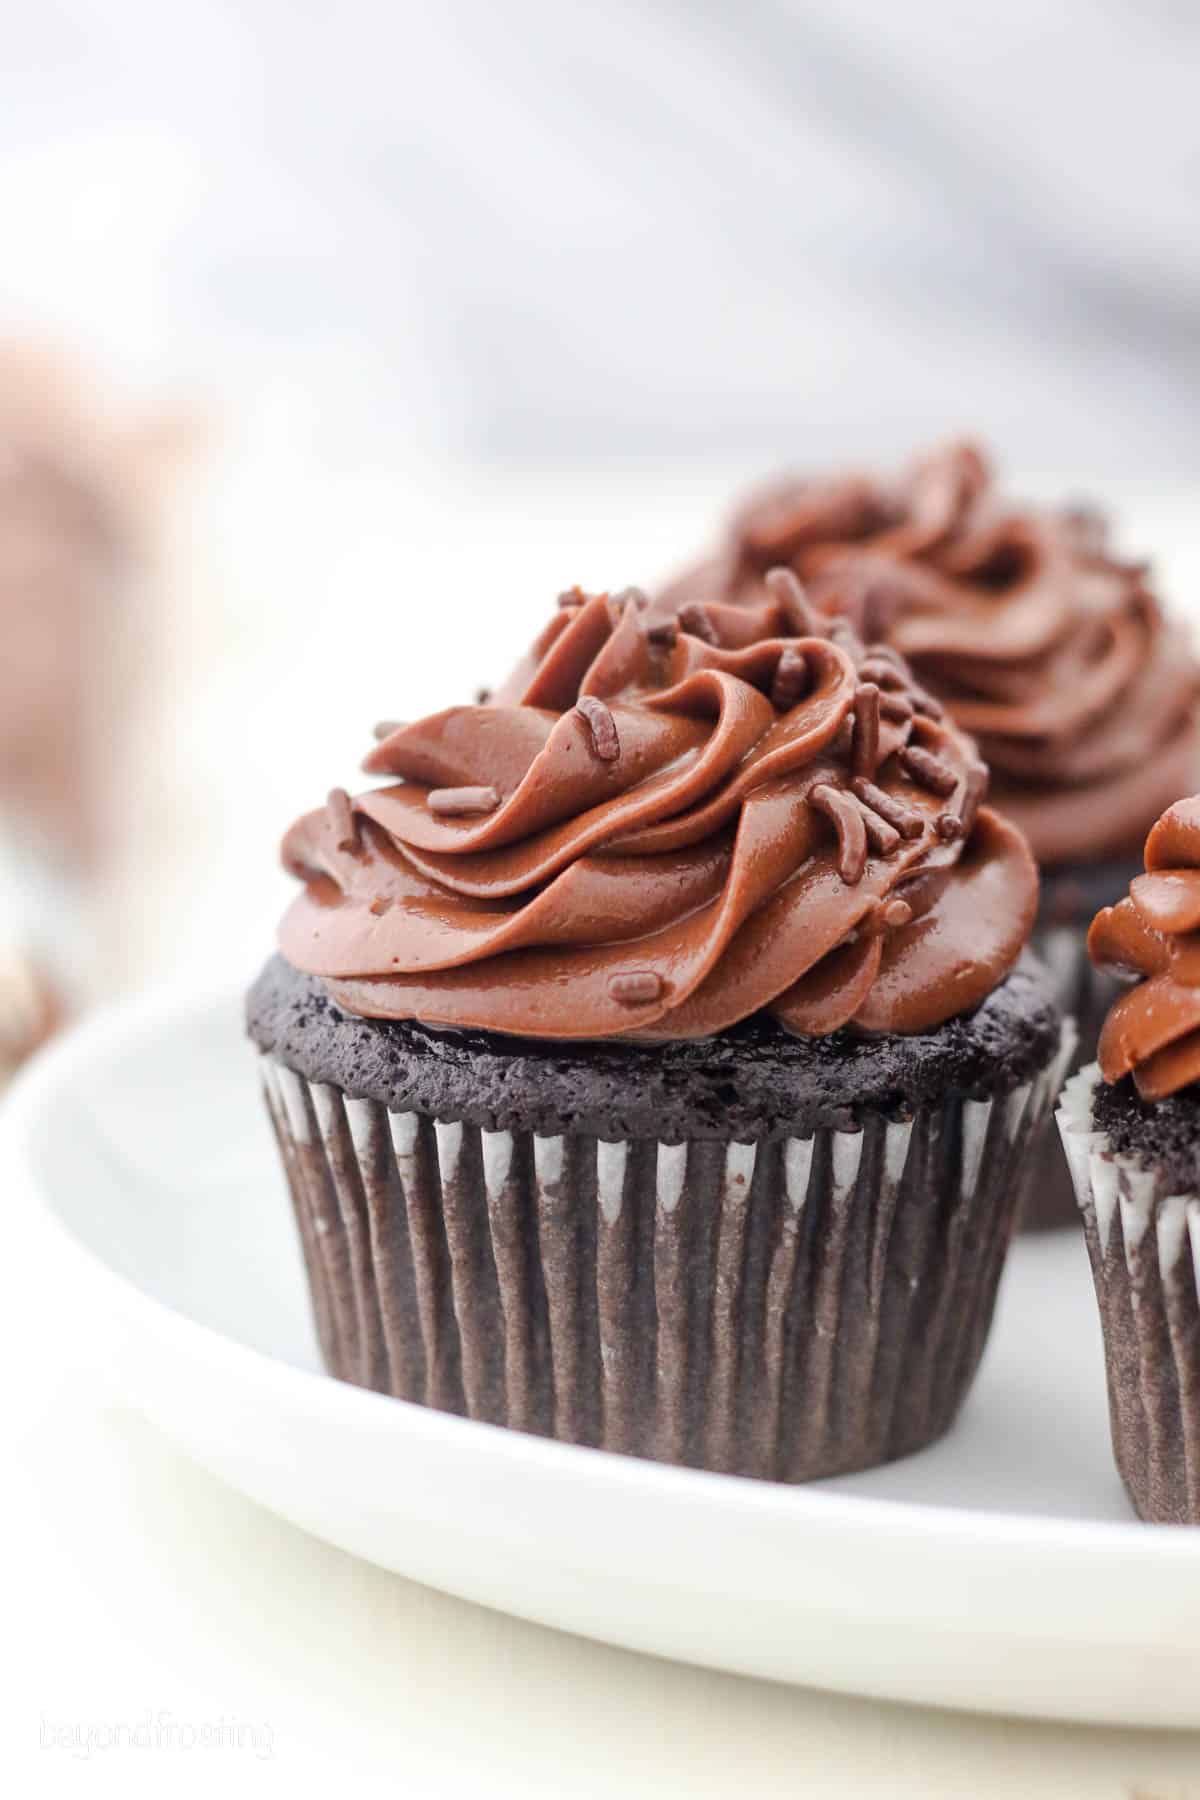 Chocolate cupcakes topped with swirls of chocolate cream cheese frosting and chocolate sprinkles on a white plate.